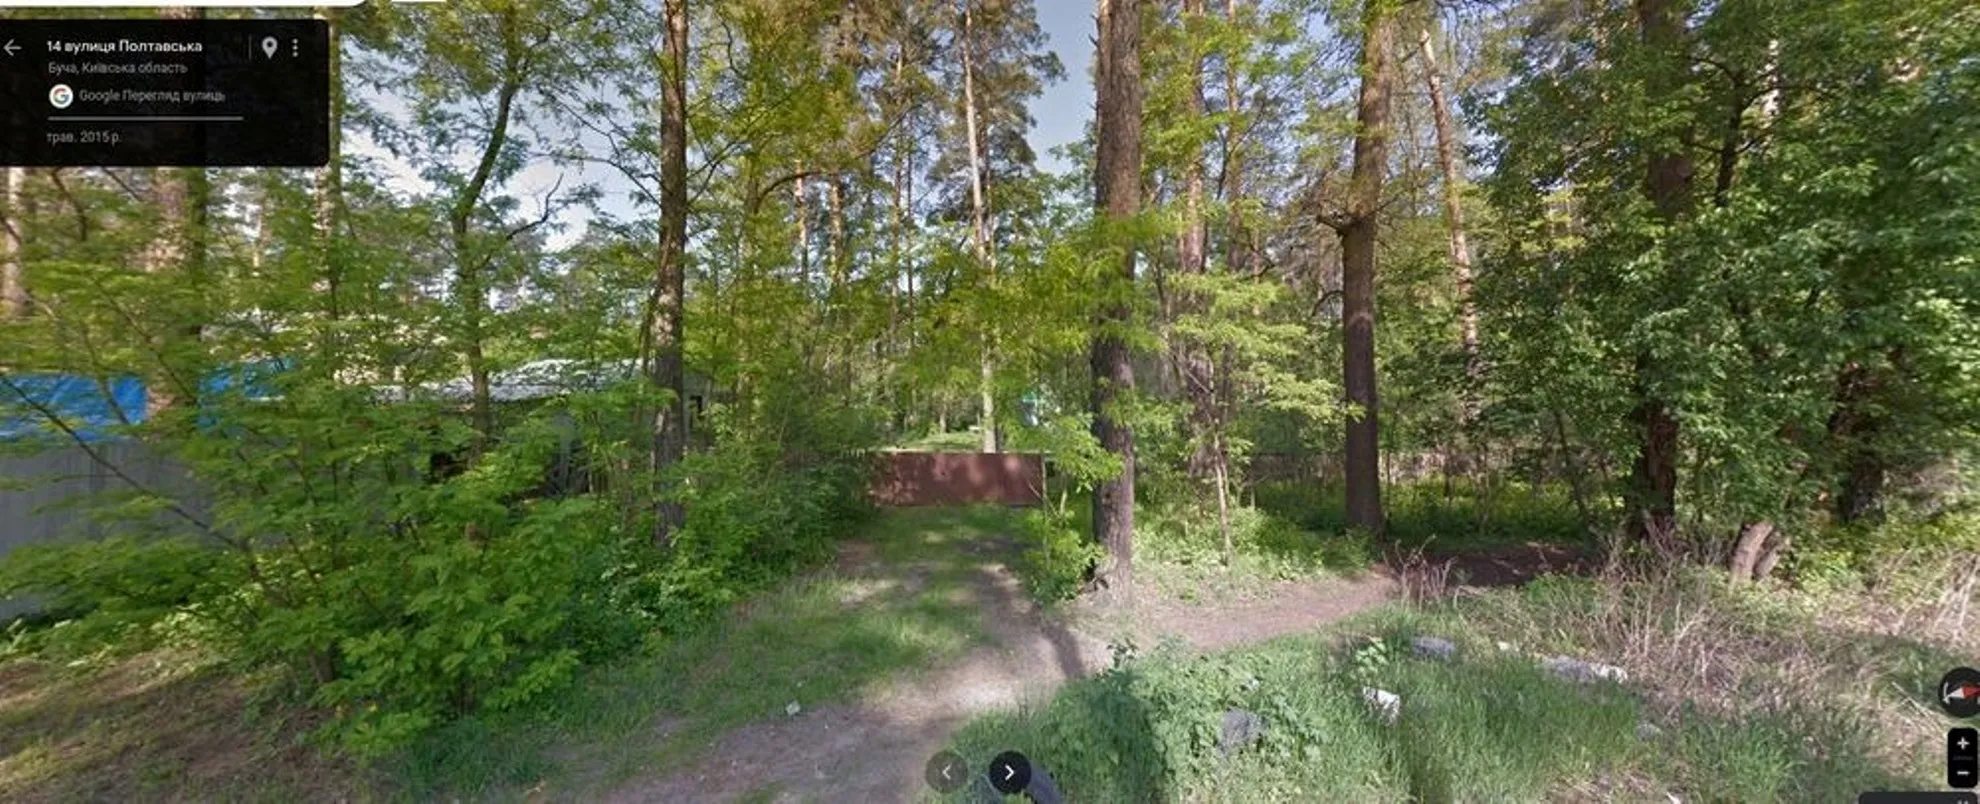 Land for sale for residential construction. Bucha. 